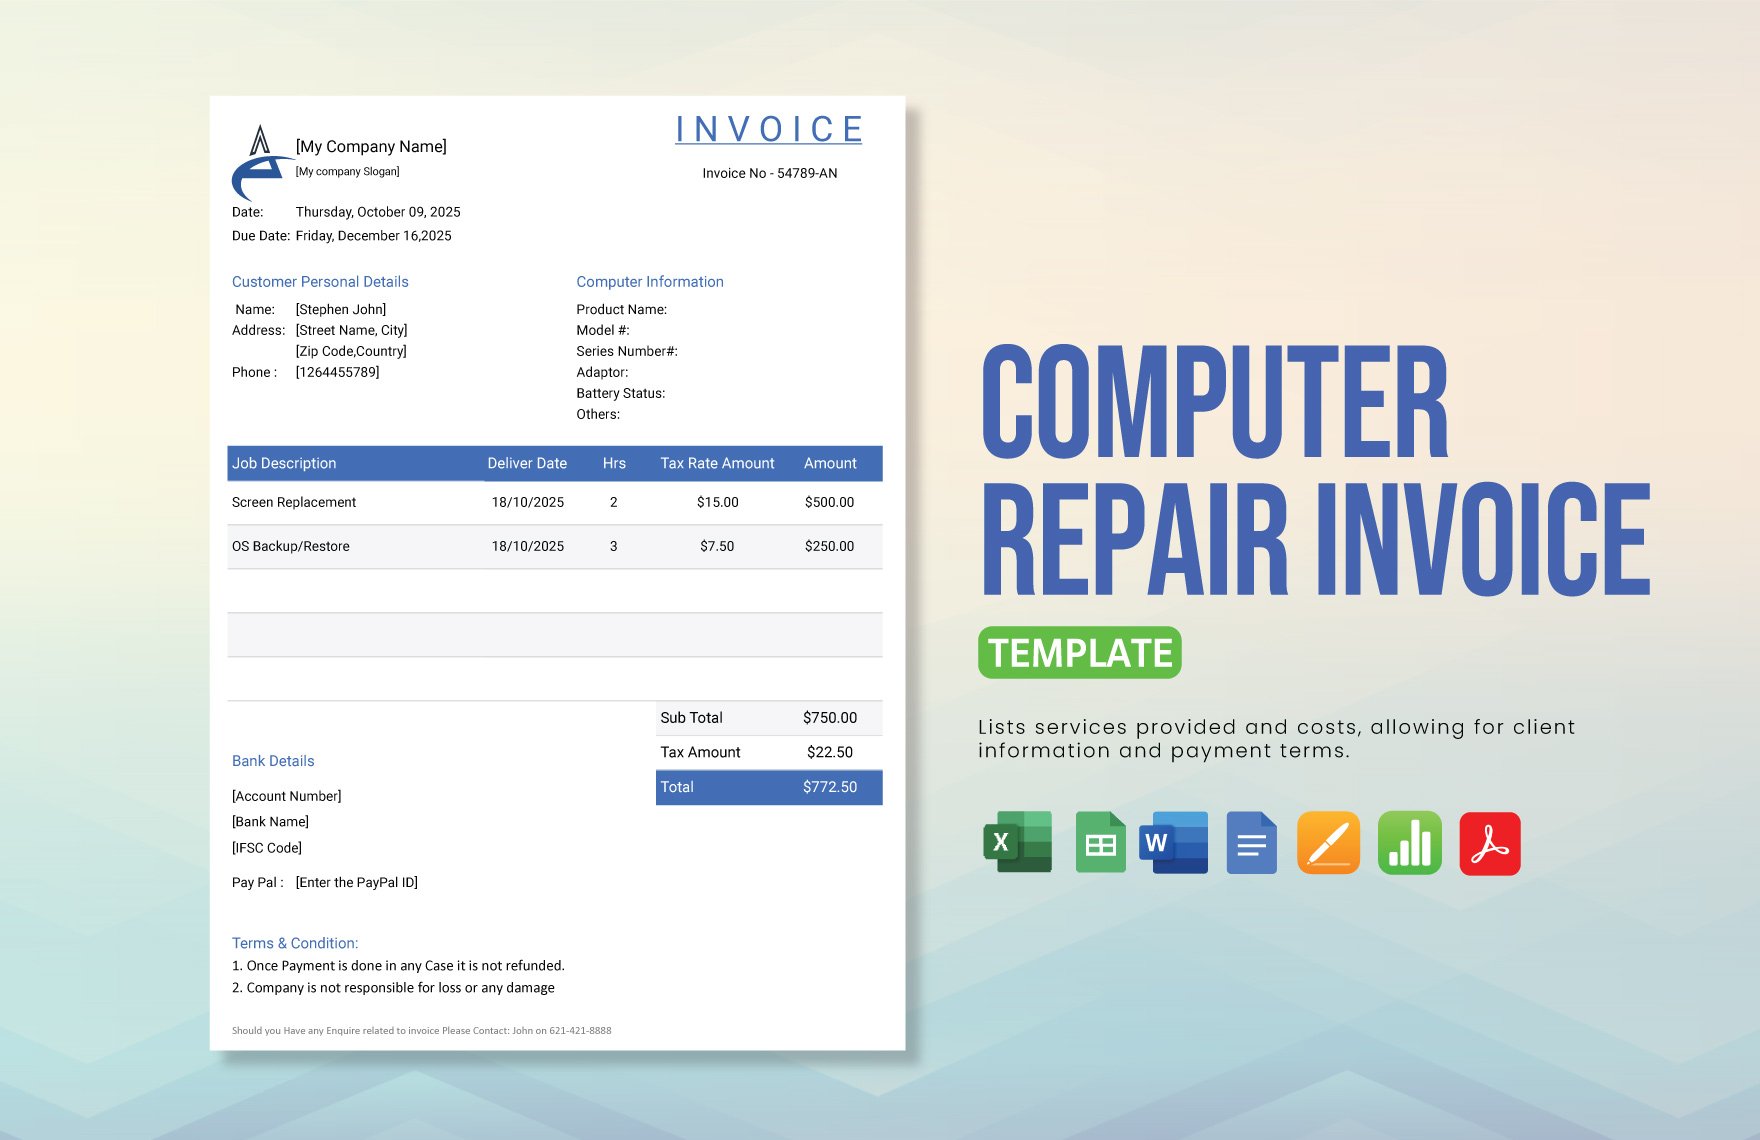 Computer Repair Invoice Template in Word, Google Docs, Excel, PDF, Google Sheets, Apple Pages, Apple Numbers